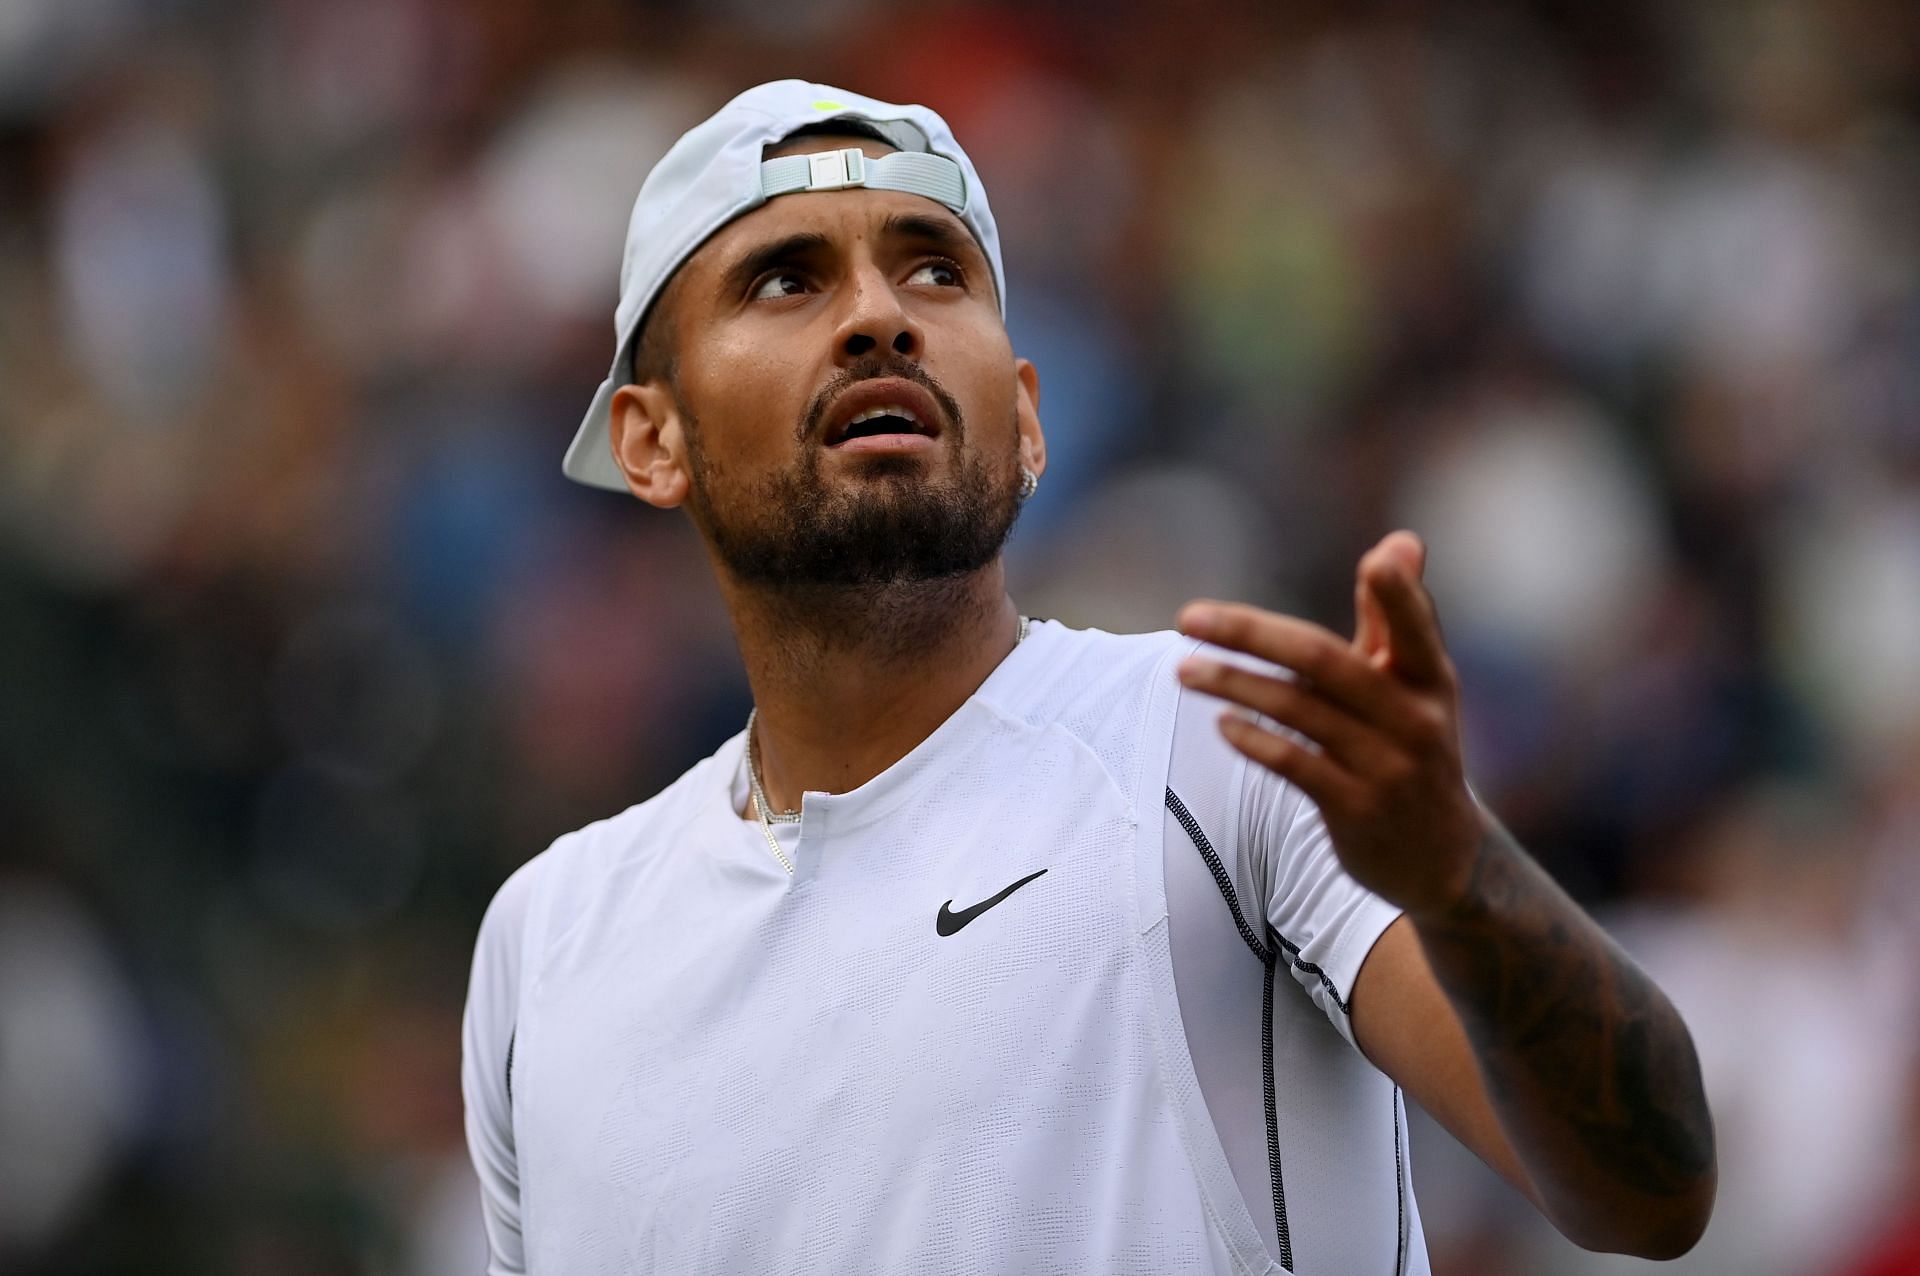 Nick Kyrgios was animated throughout the contest